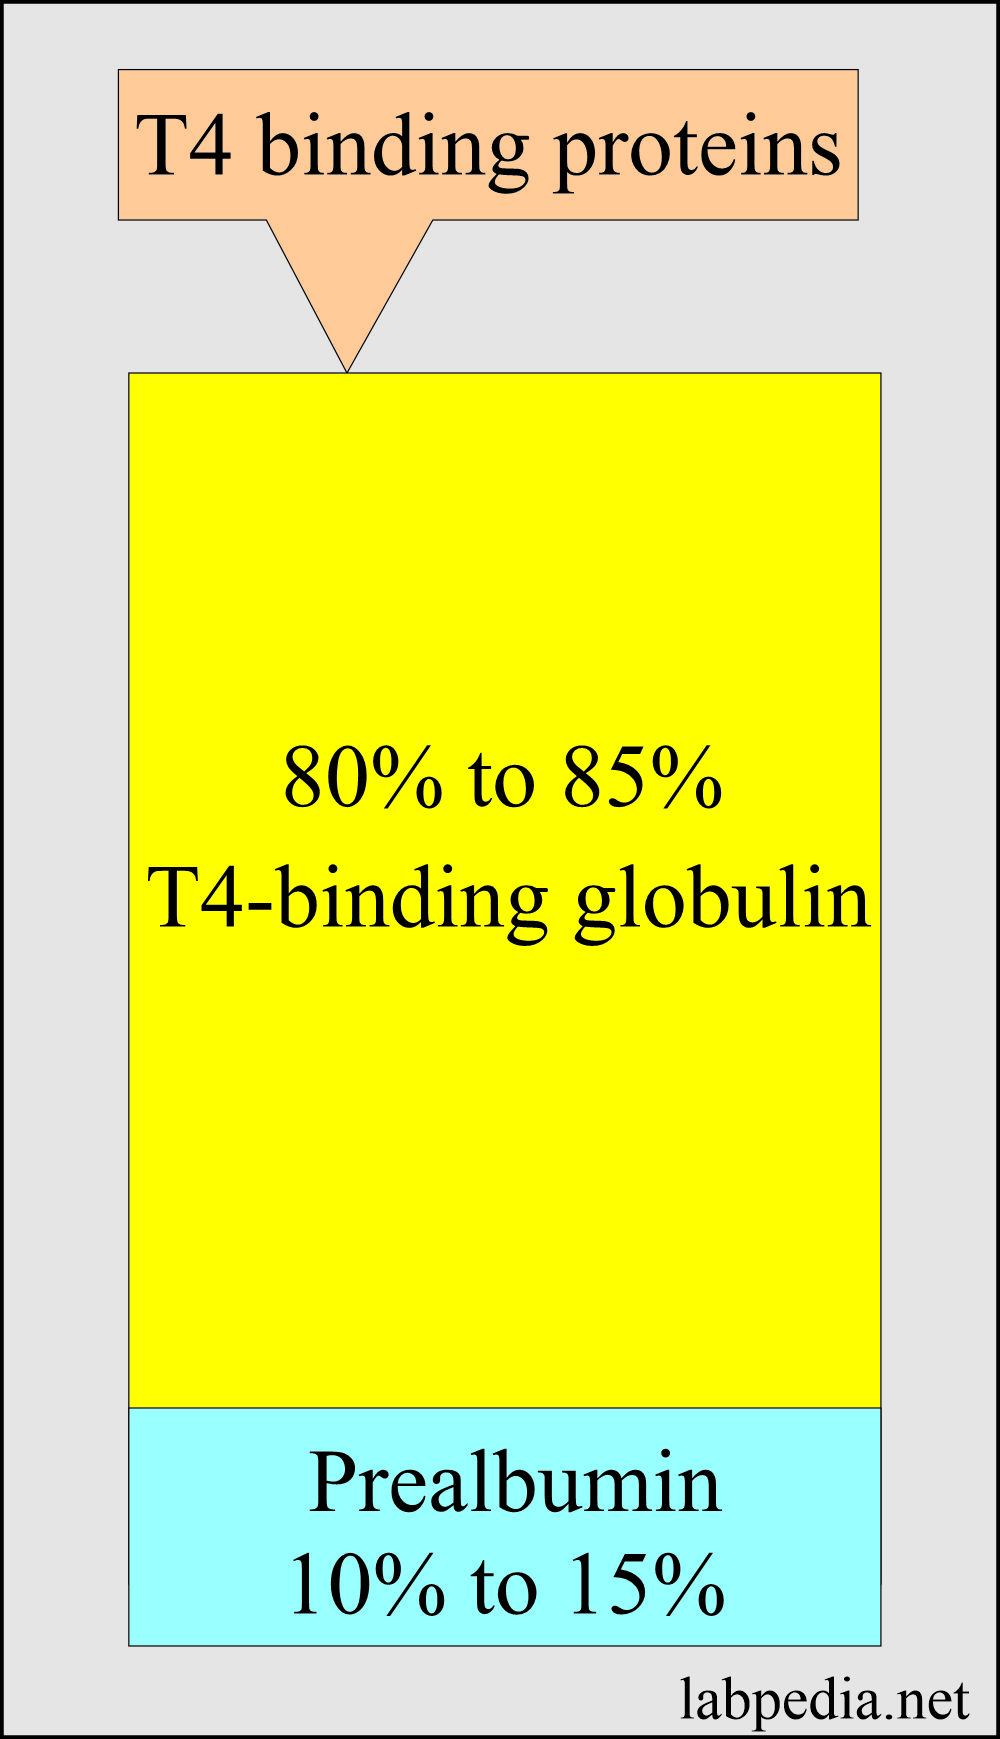 T4 binding proteins and share of prealbumin